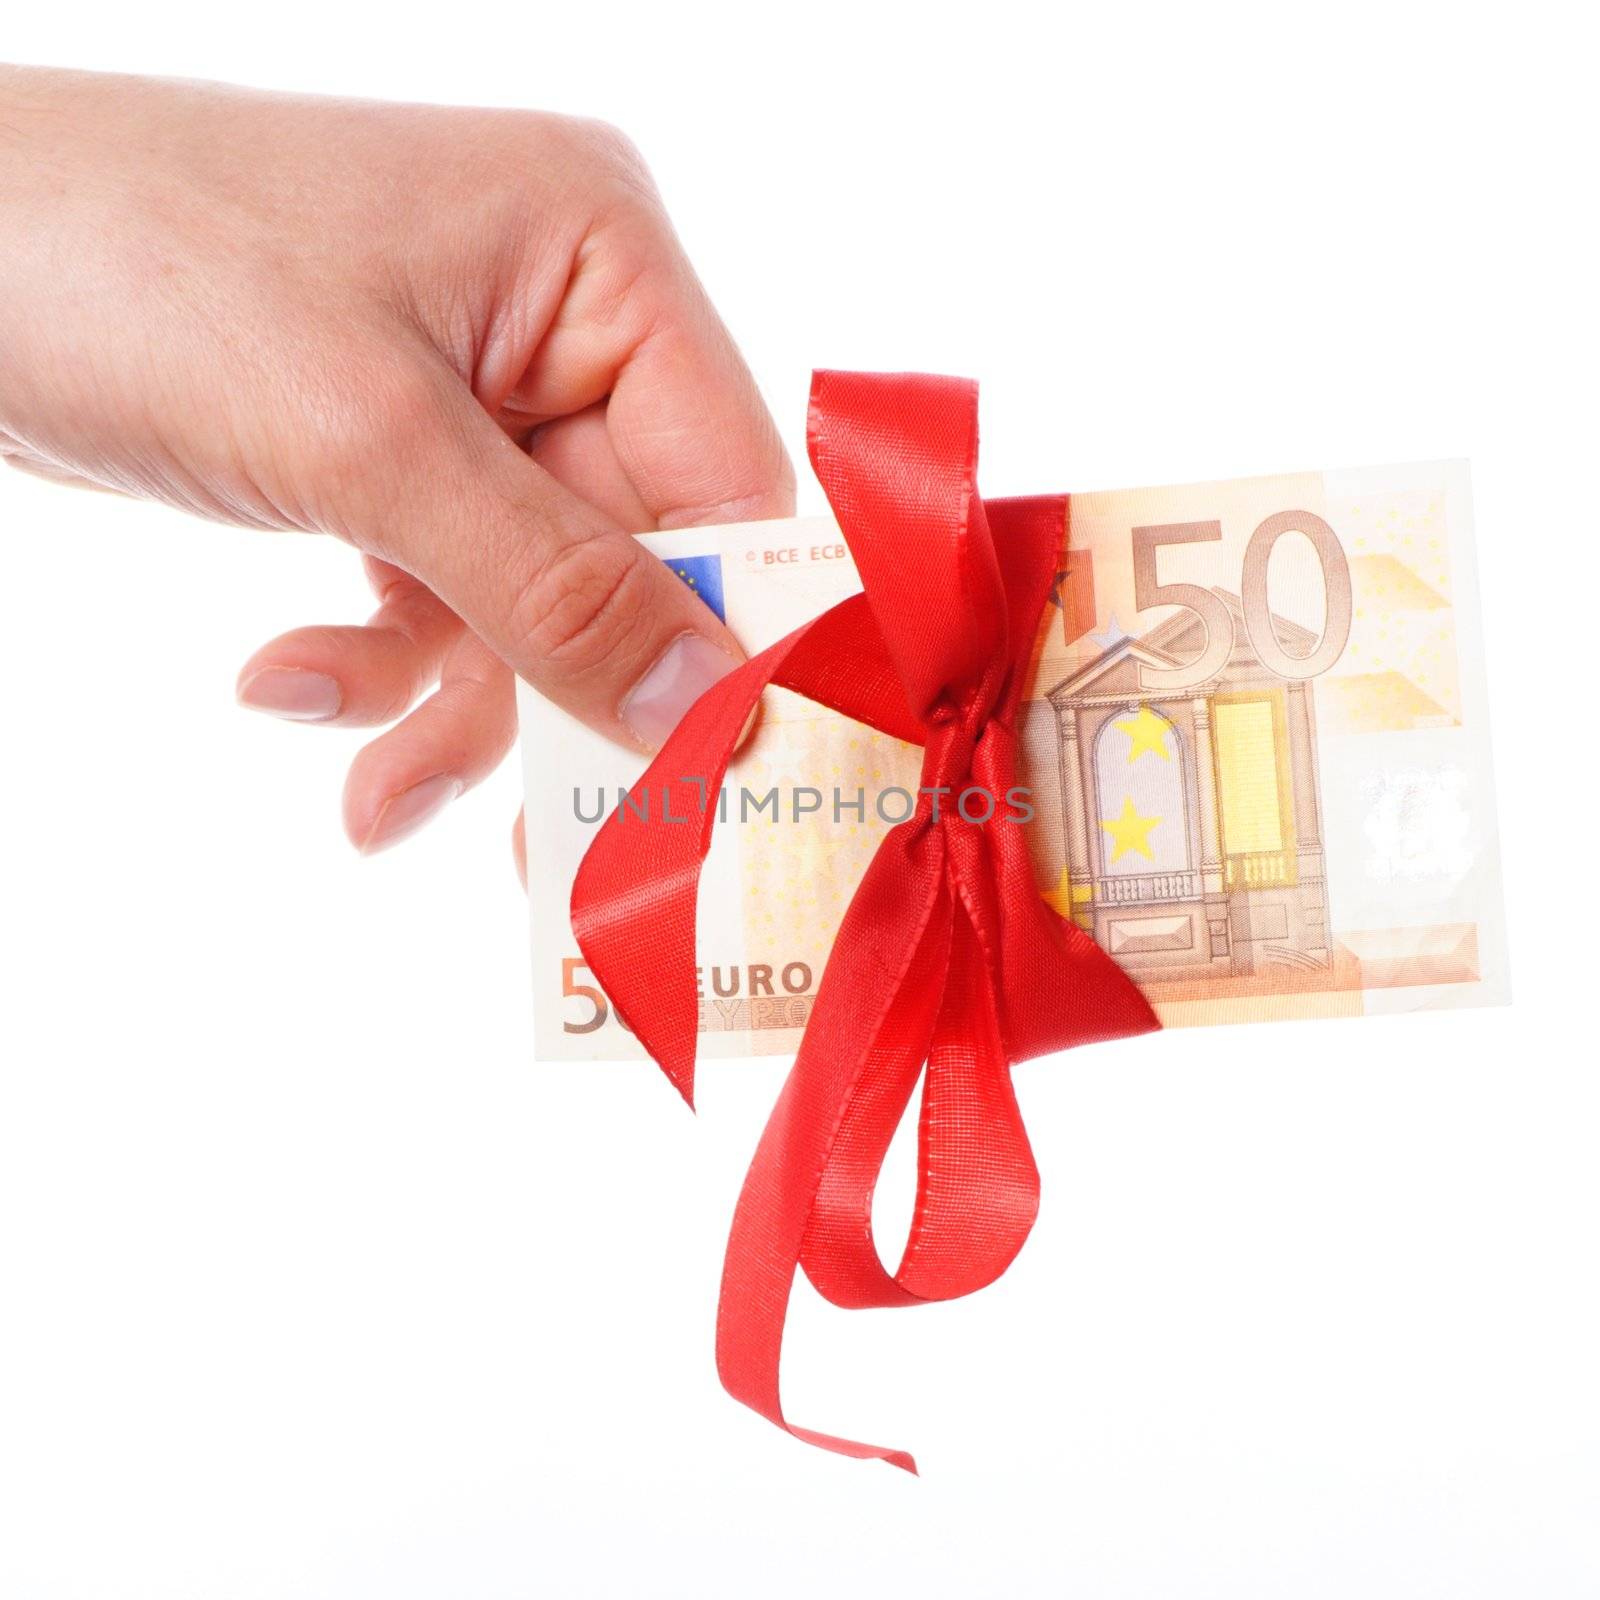 euro money with red ribbon showing gift concept